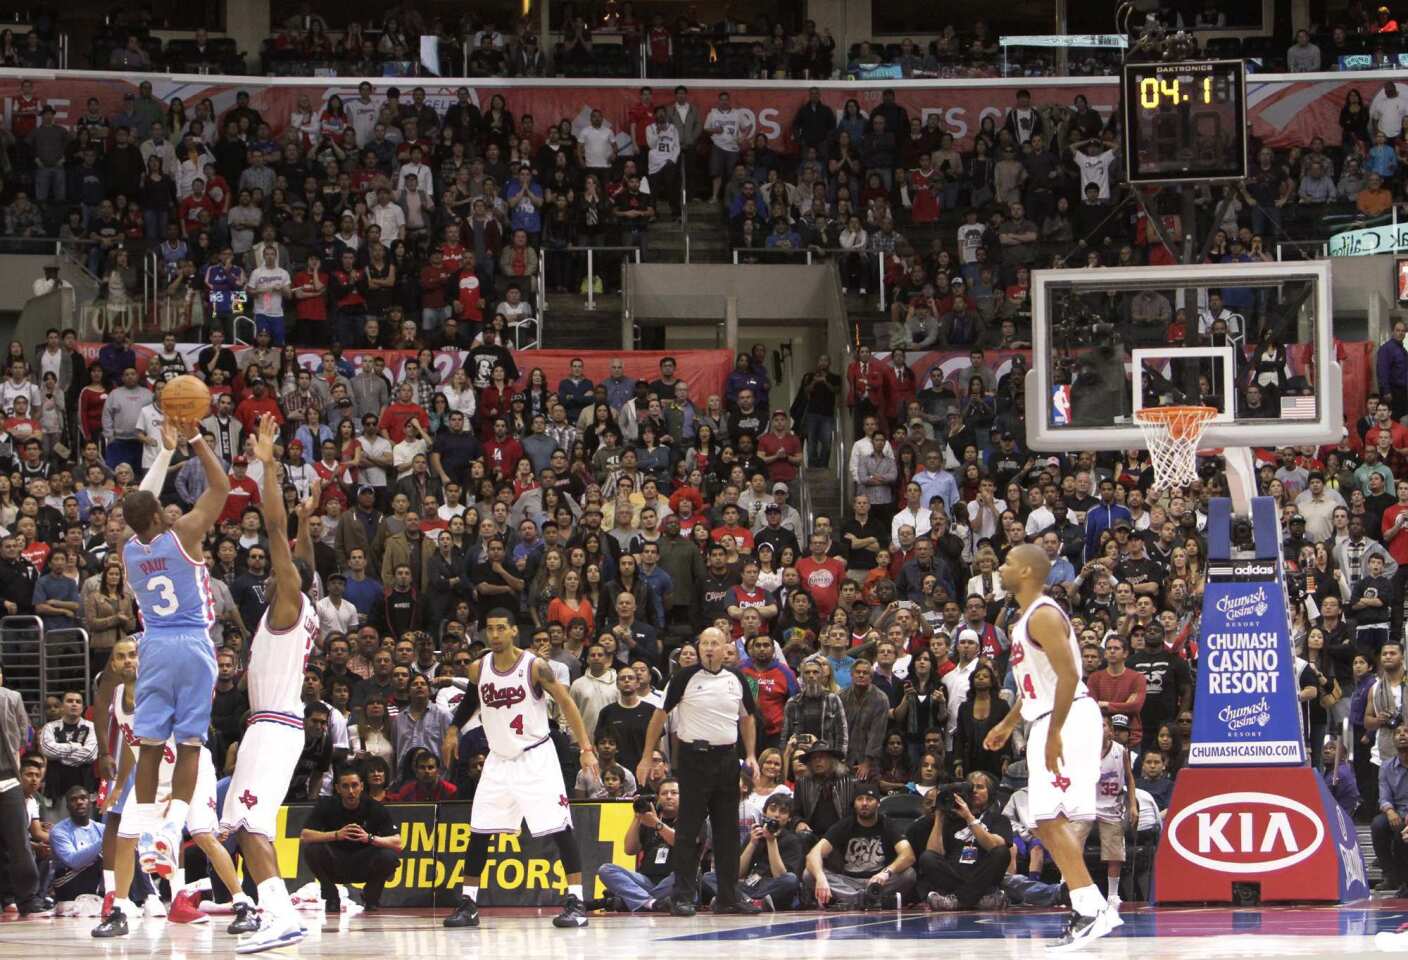 Clippers point guard Chris Paul attempts a tying three-point shot against the Spurs in the final seconds of overtime on Saturday afternoon at Staples Center. Paul's shot missed and San Antonio collected a 103-100 victory.